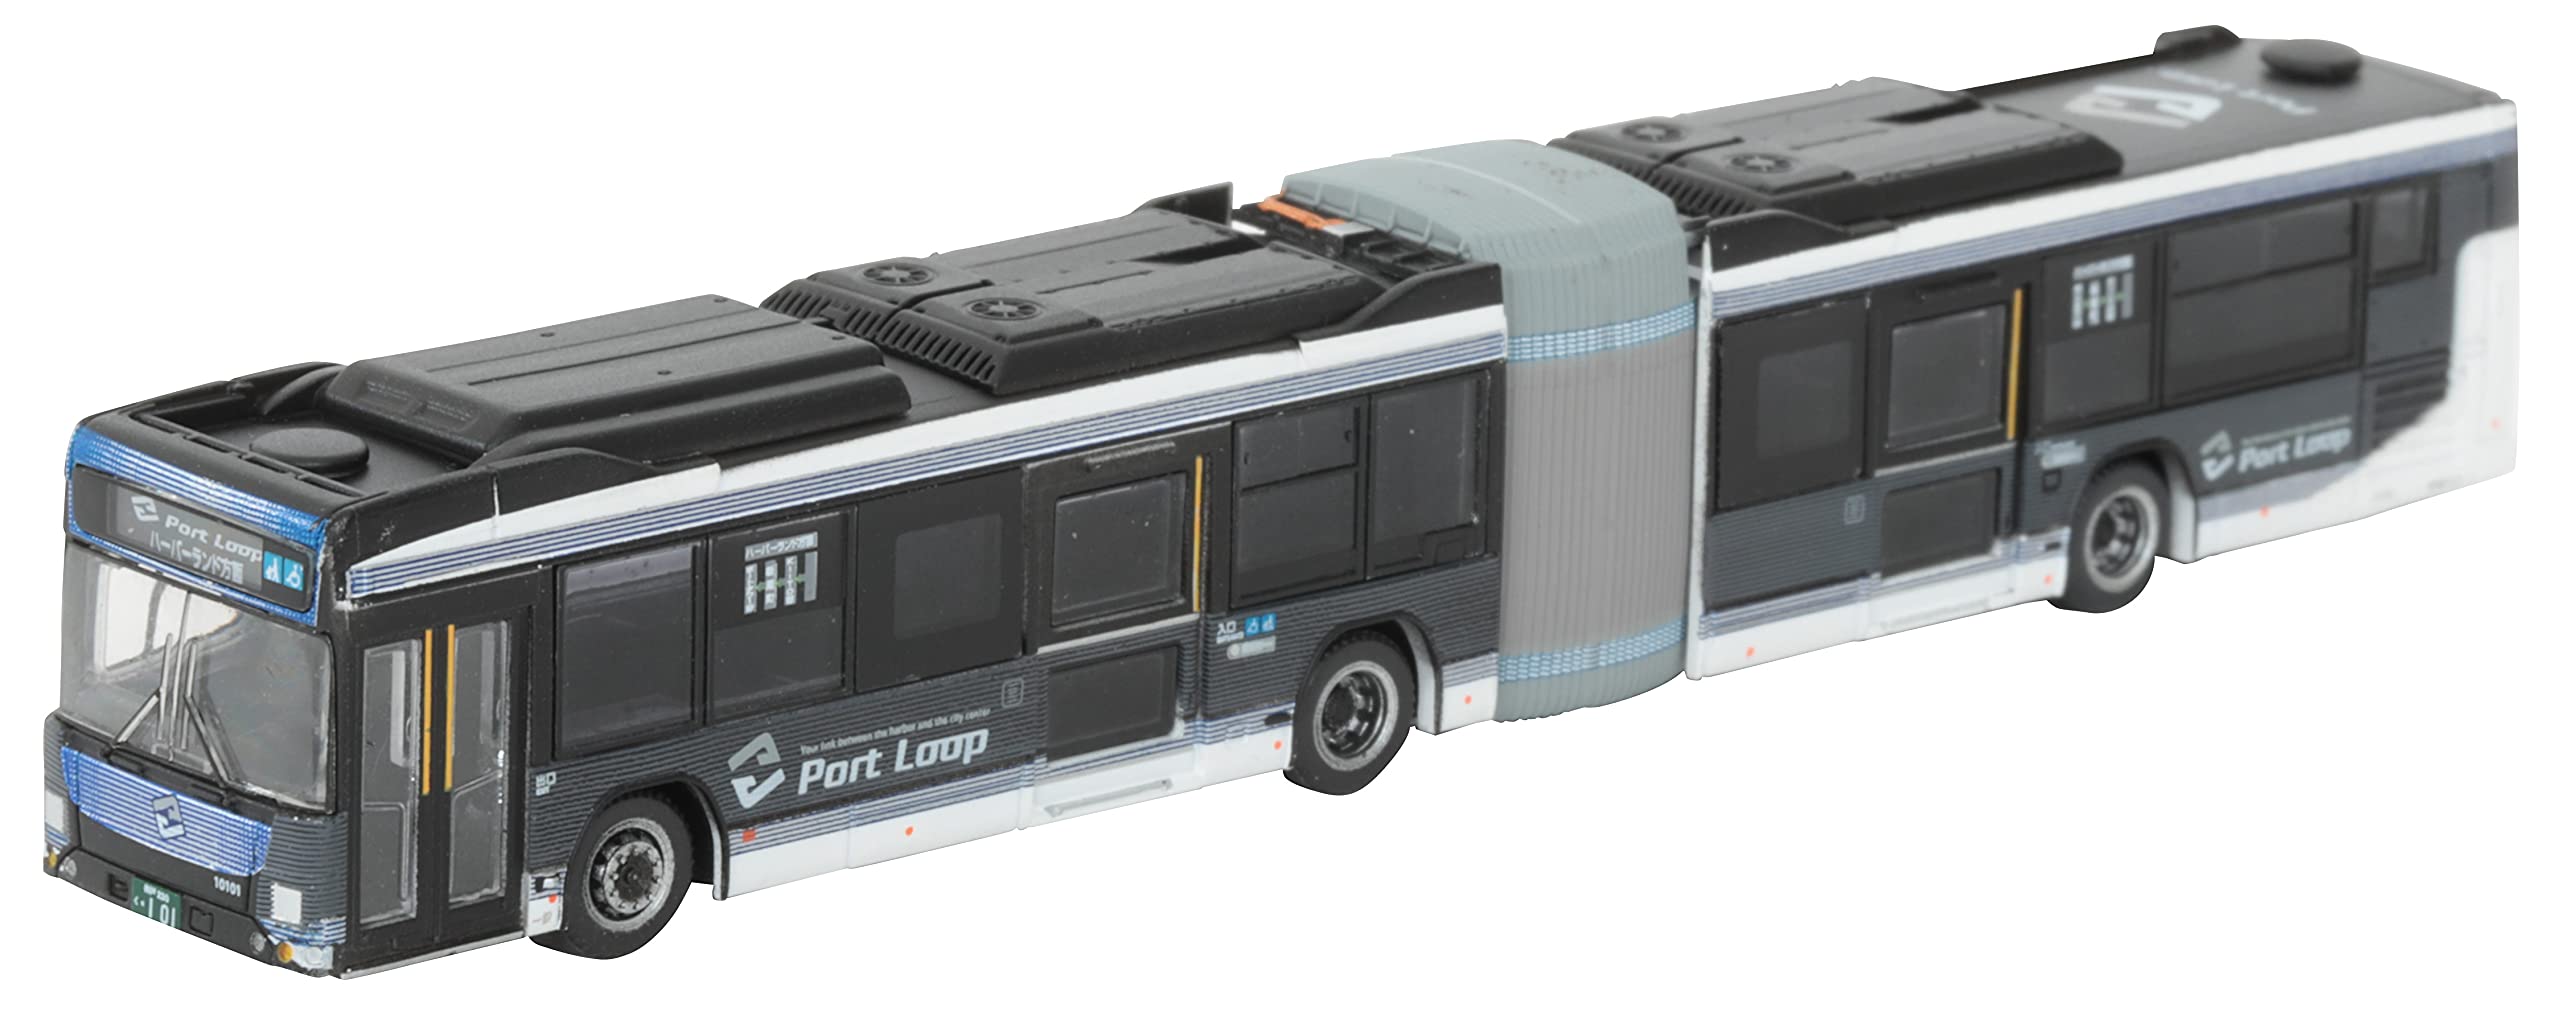 Tomytec Bus Collection - Shinki Port Loop Articulated Bus Diorama Limited Edition 316541